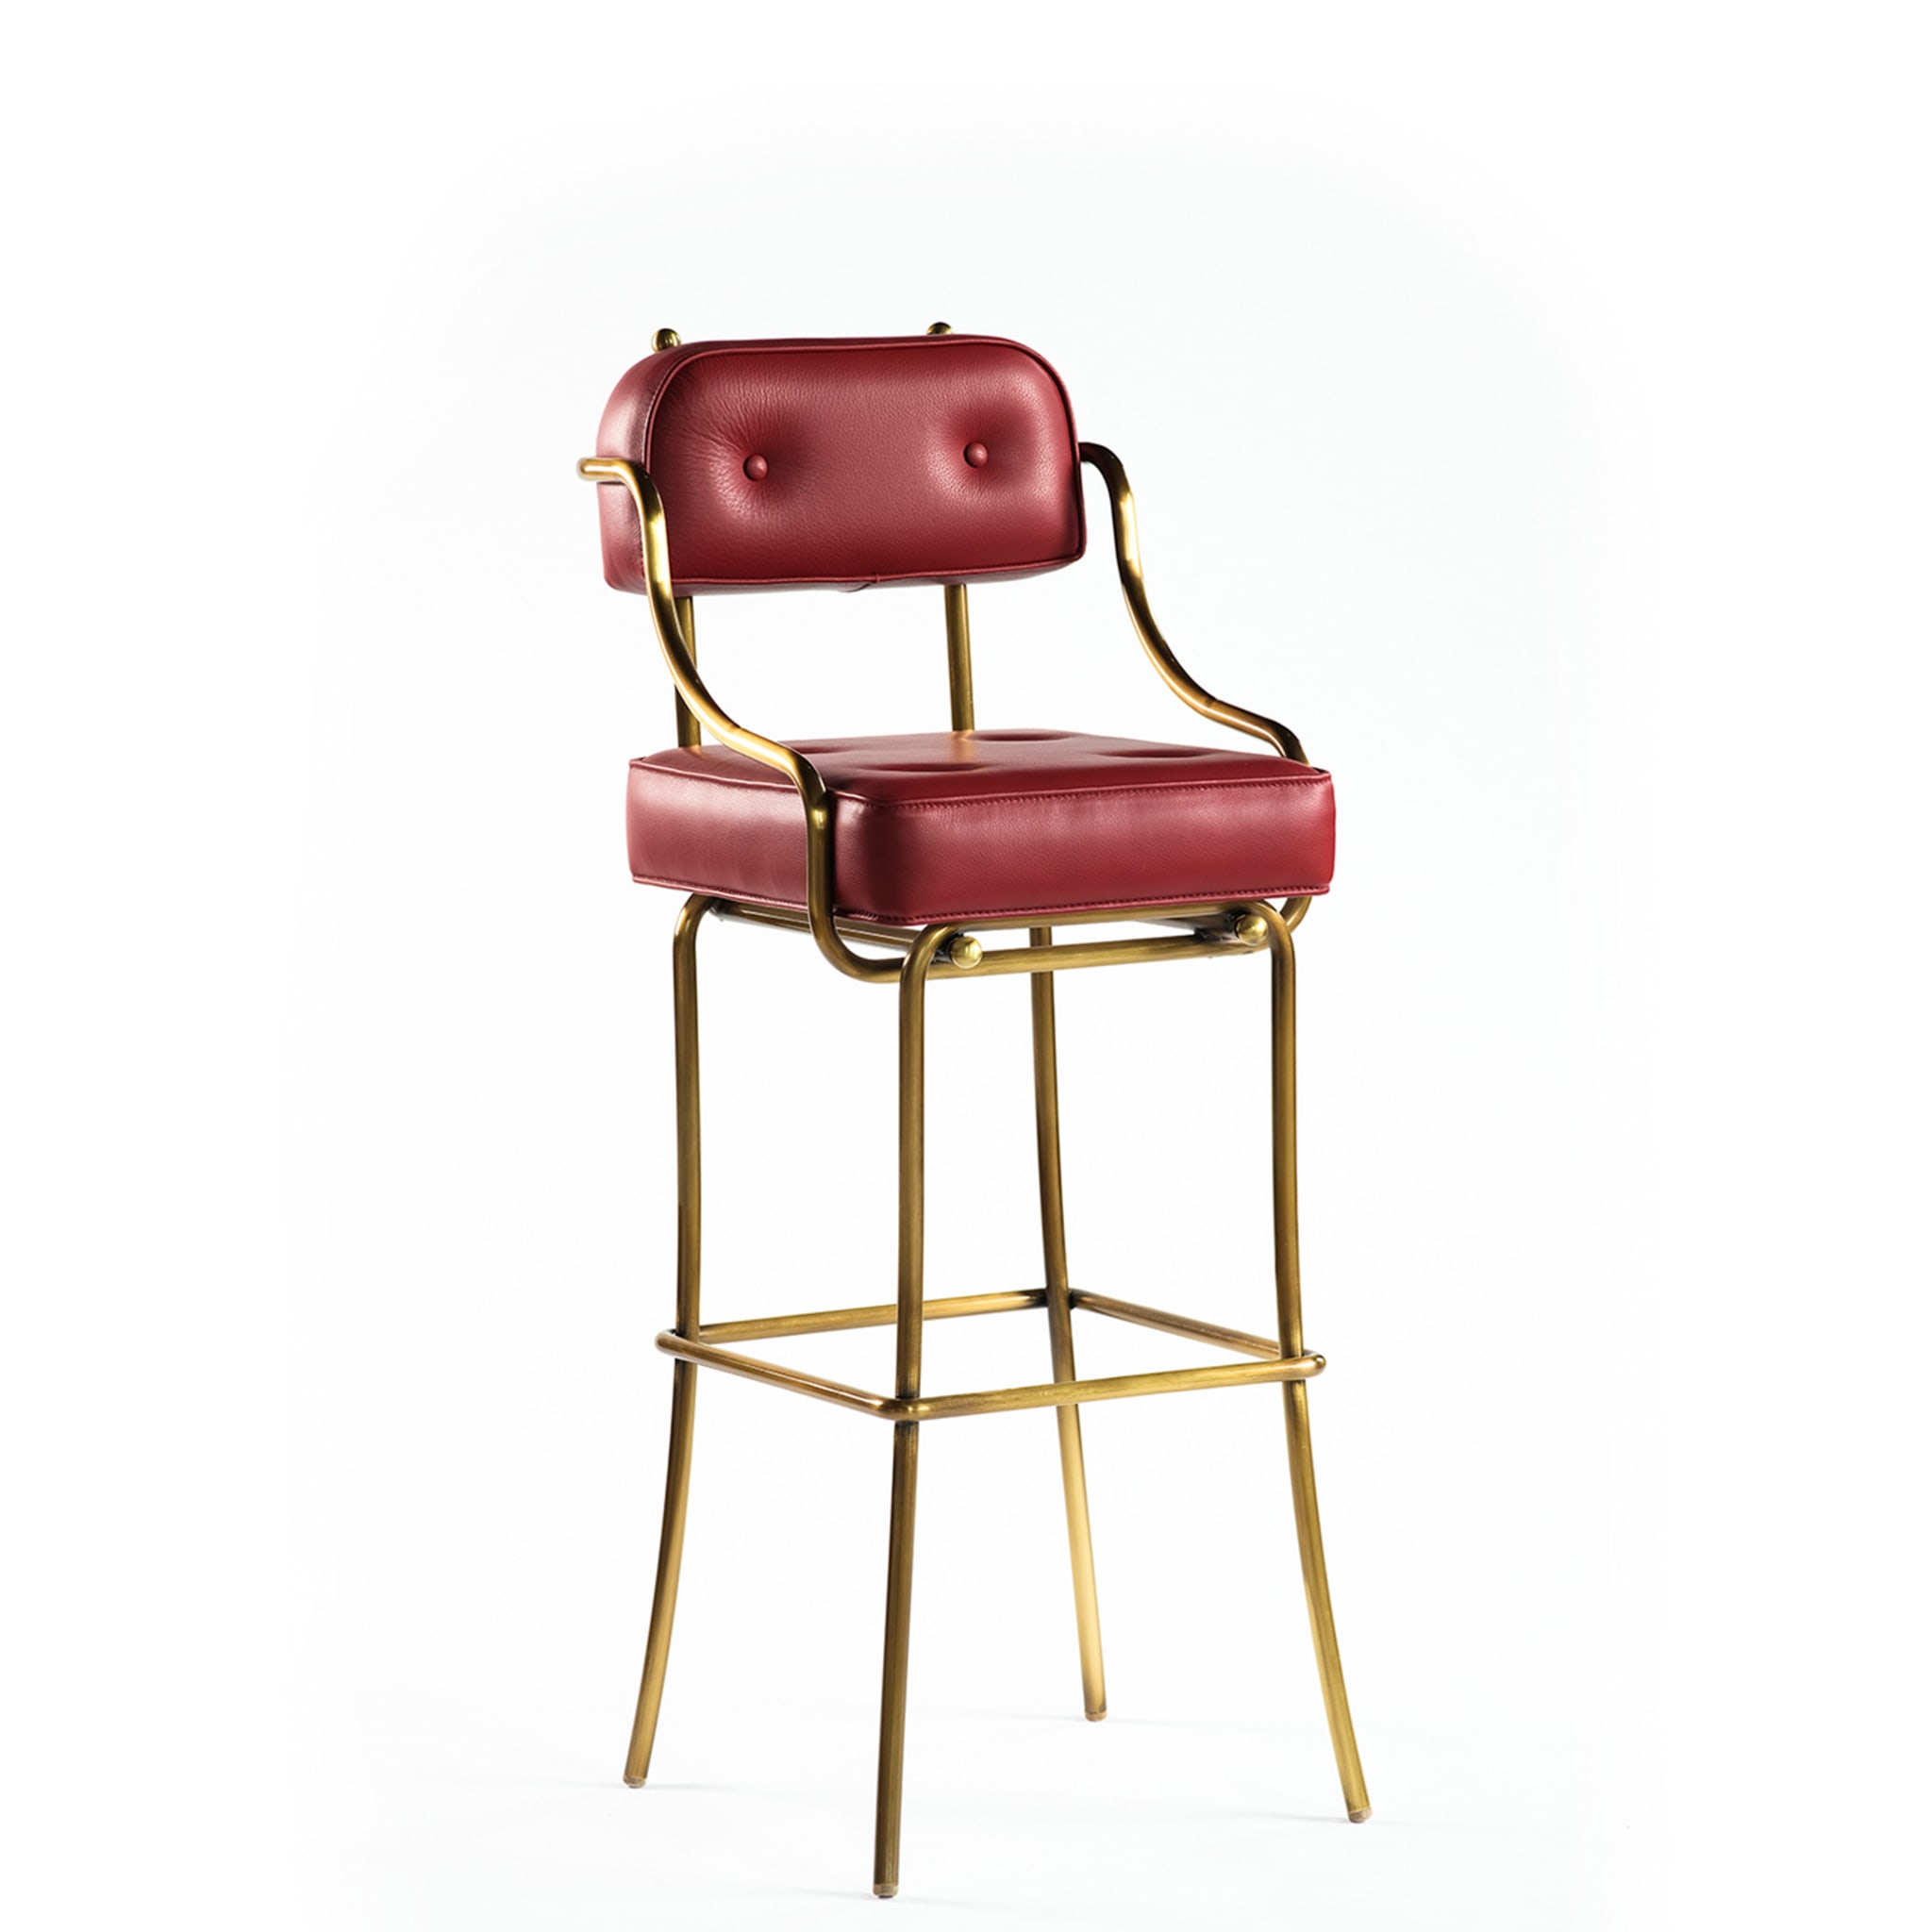 The Red Bar Stool  - Alternative view 3